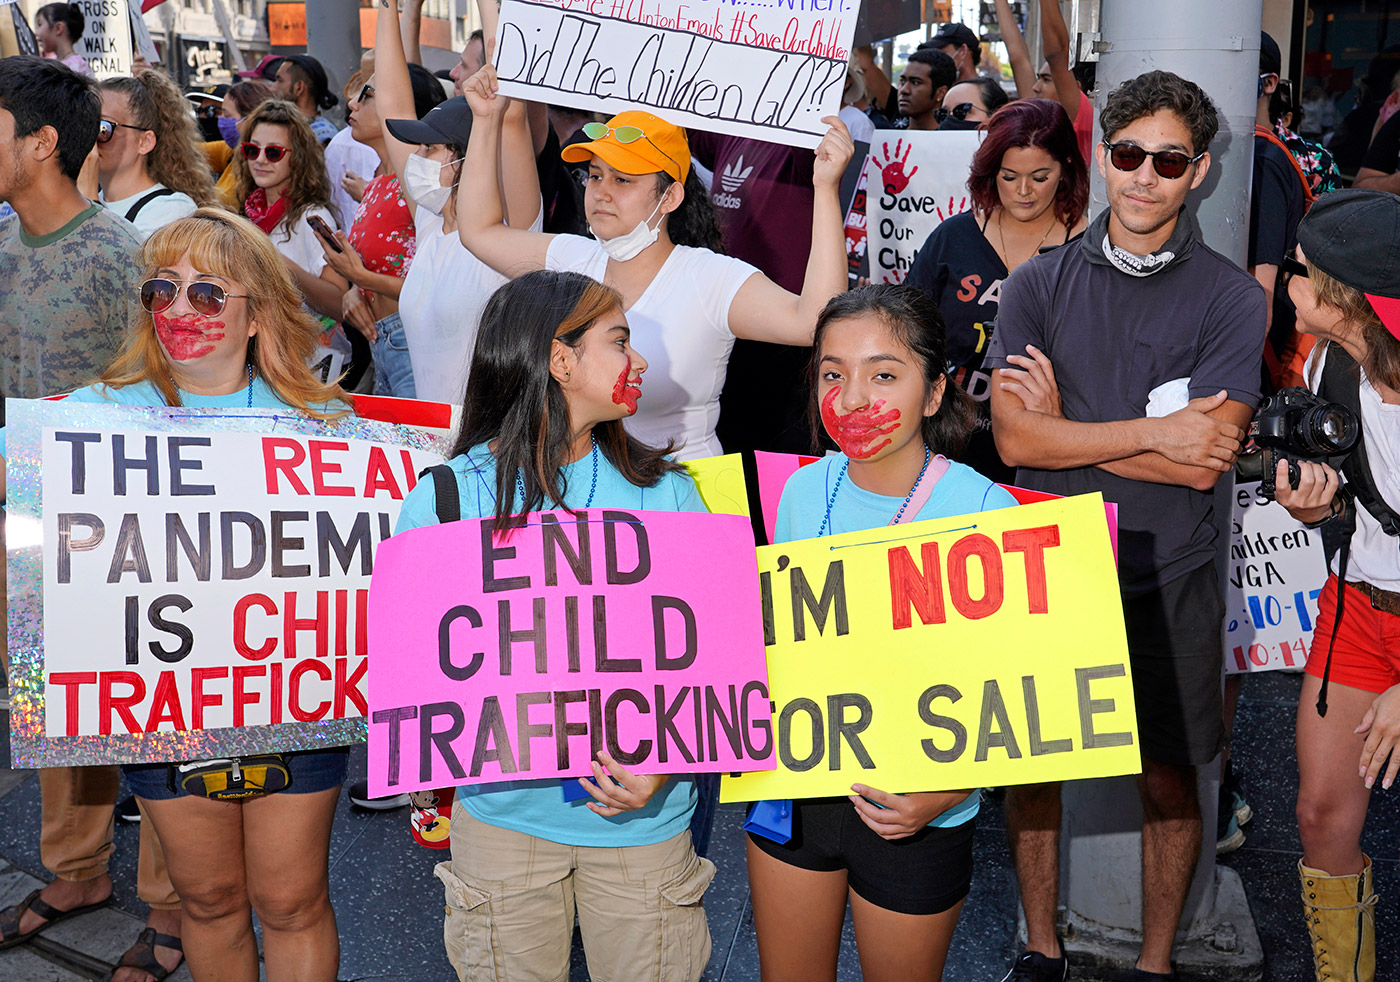 Protesters at a Save Our Children rally in Los Angeles, Aug. 22, 2020.